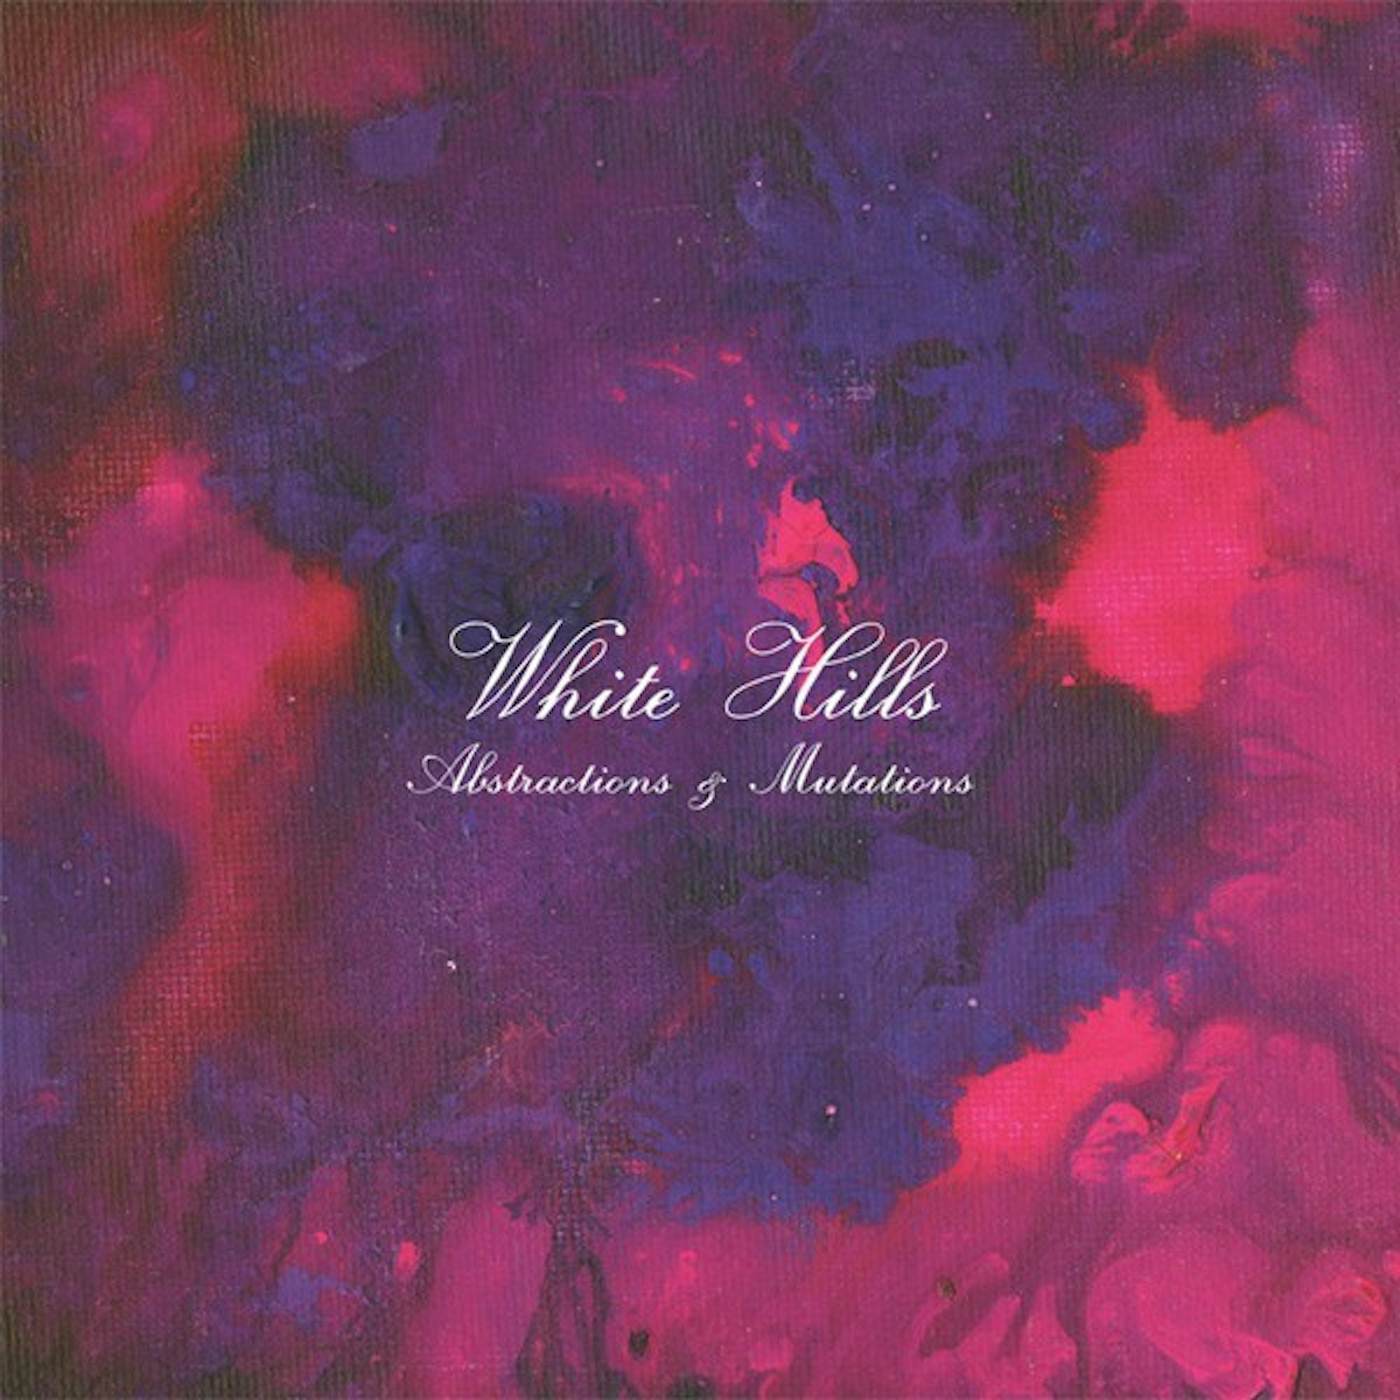 White Hills ABSTRACTIONS & MUTATIONS Vinyl Record